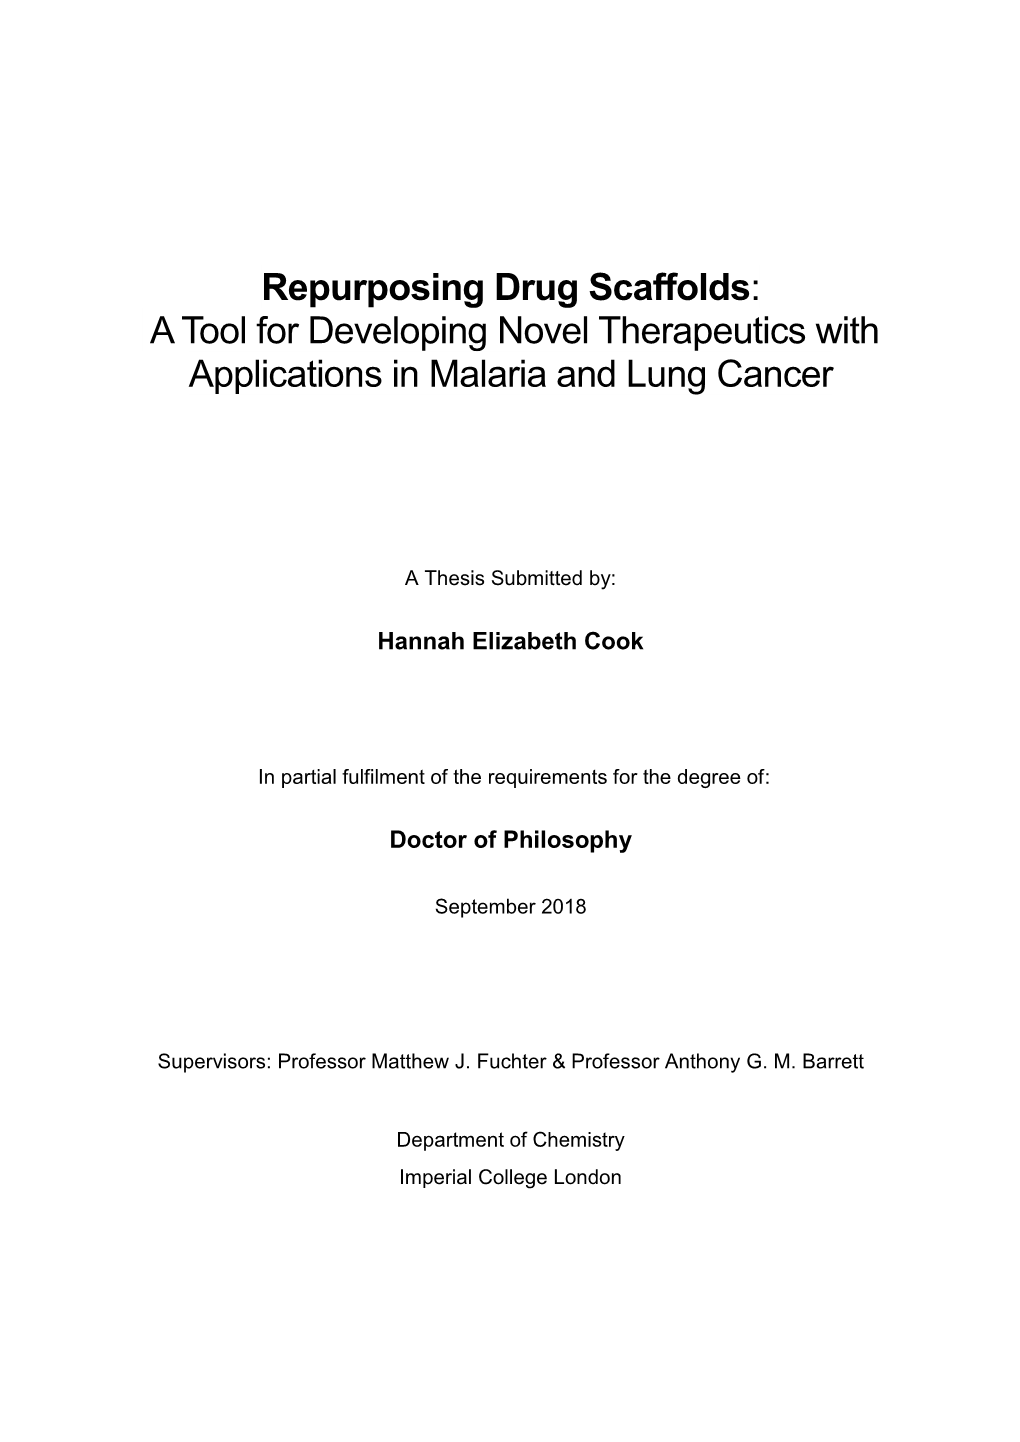 Repurposing Drug Scaffolds: a Tool for Developing Novel Therapeutics with Applications in Malaria and Lung Cancer